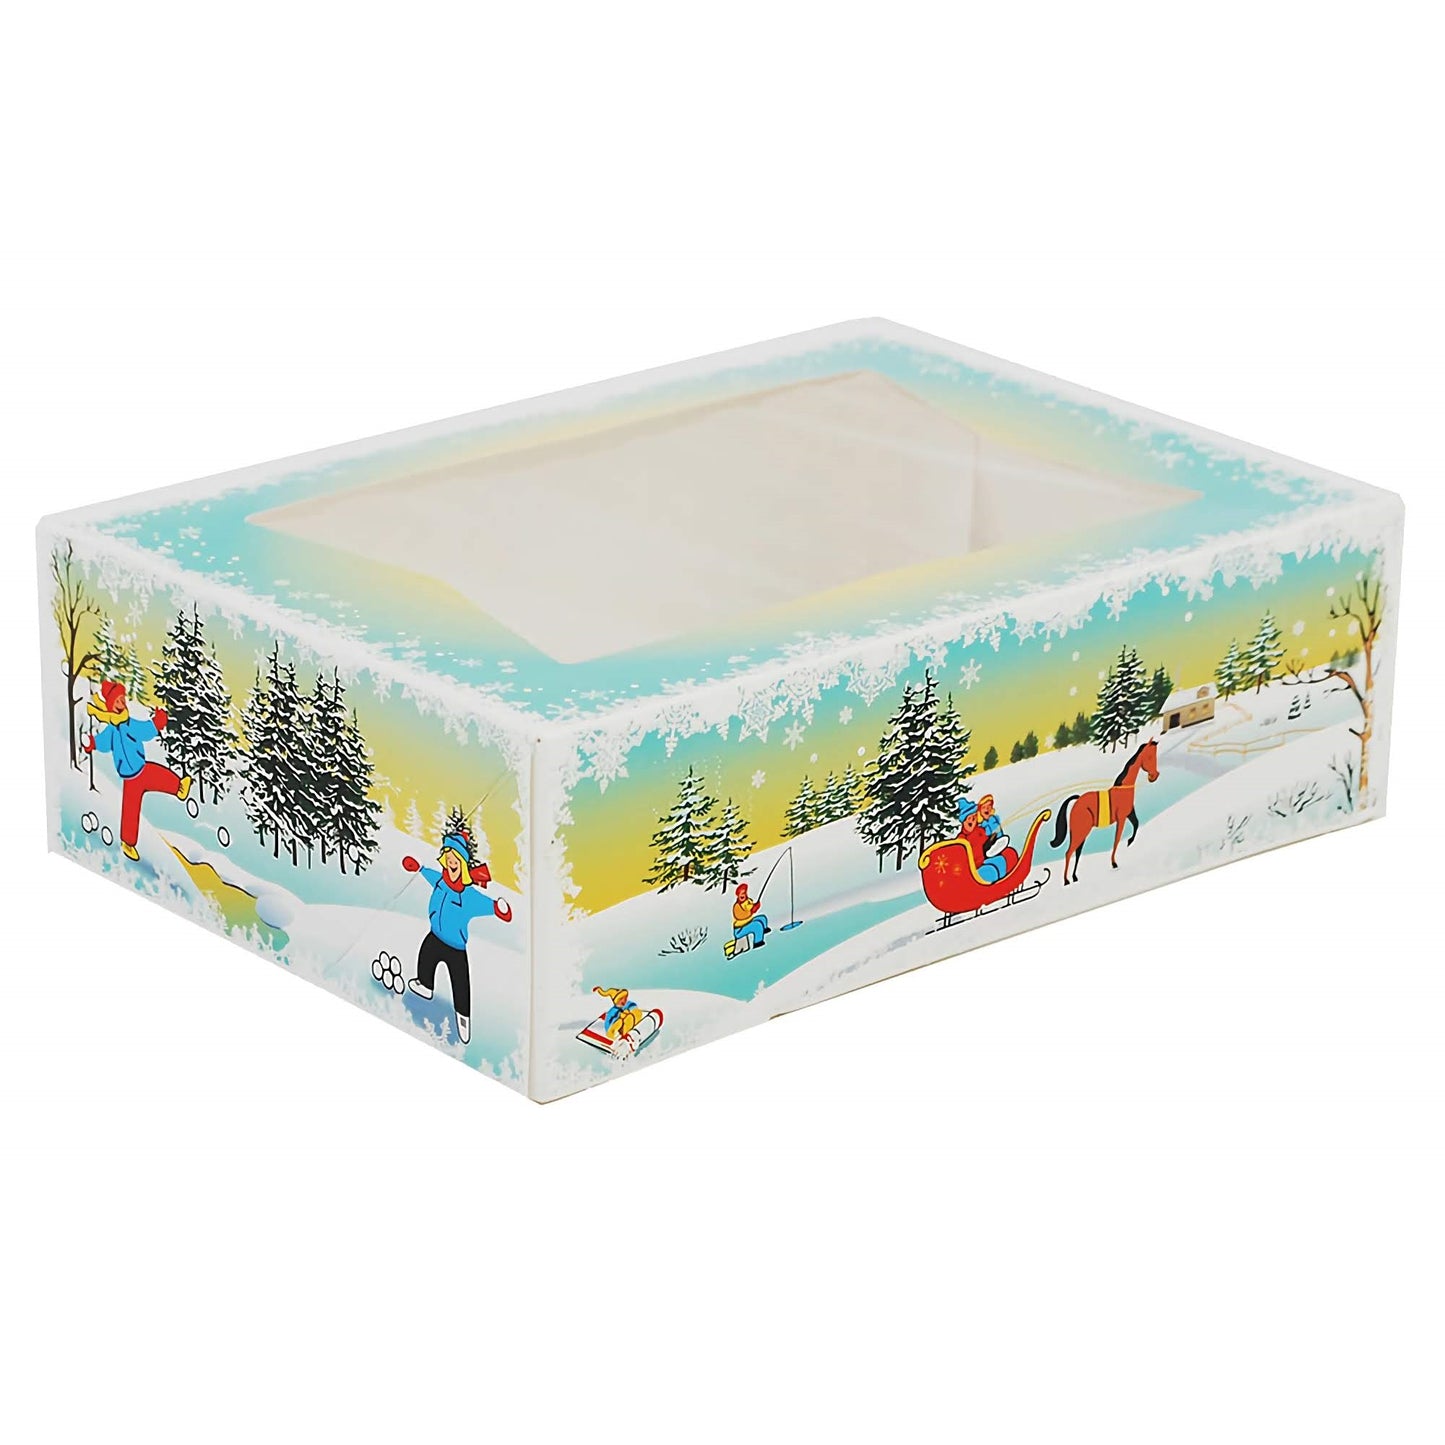 This image features a medium-sized treat box with a clear lid, showcasing a festive Winter Wonderland theme. The box's sides are adorned with colorful illustrations of outdoor winter activities, such as people skiing, sledging, and skating. A horse-drawn sleigh, evergreen trees, and playful snowflakes add to the charming snowy scene. The design evokes a joyful, holiday atmosphere, perfect for packaging seasonal treats and gifts.